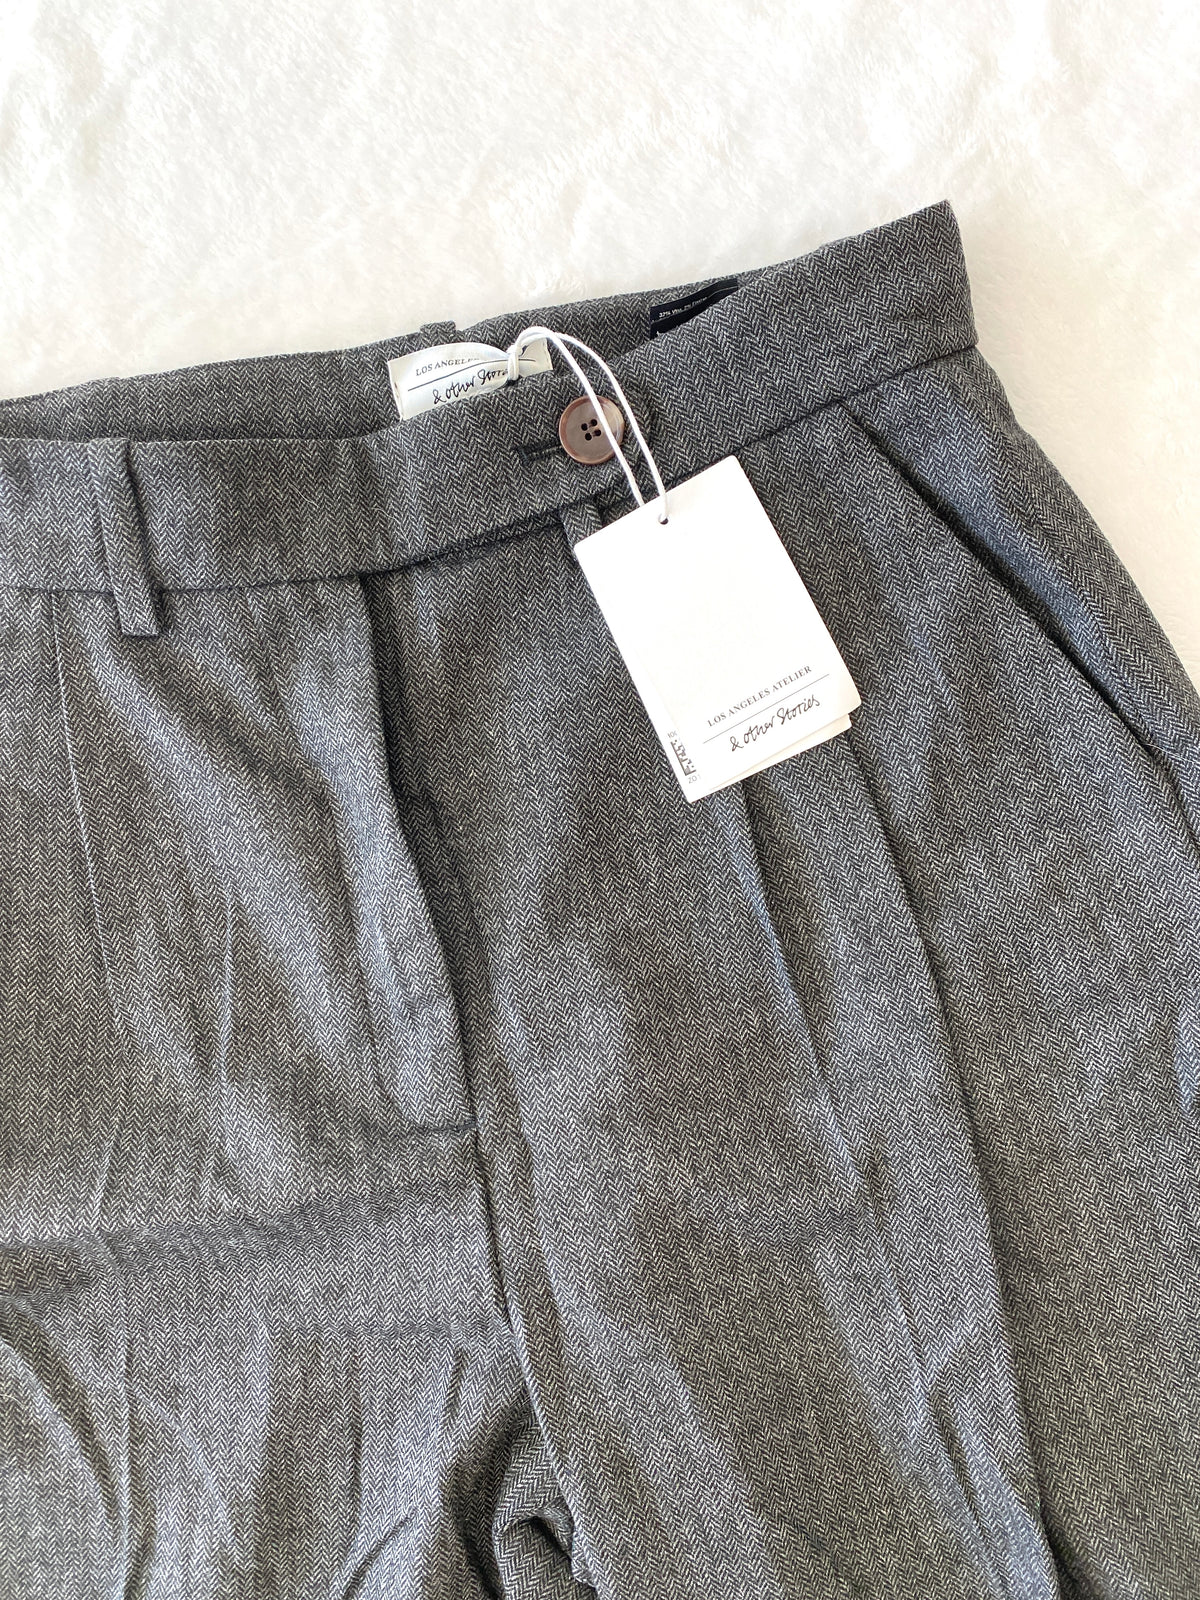 And Other Stories Work Pants - NEW WITH TAGS